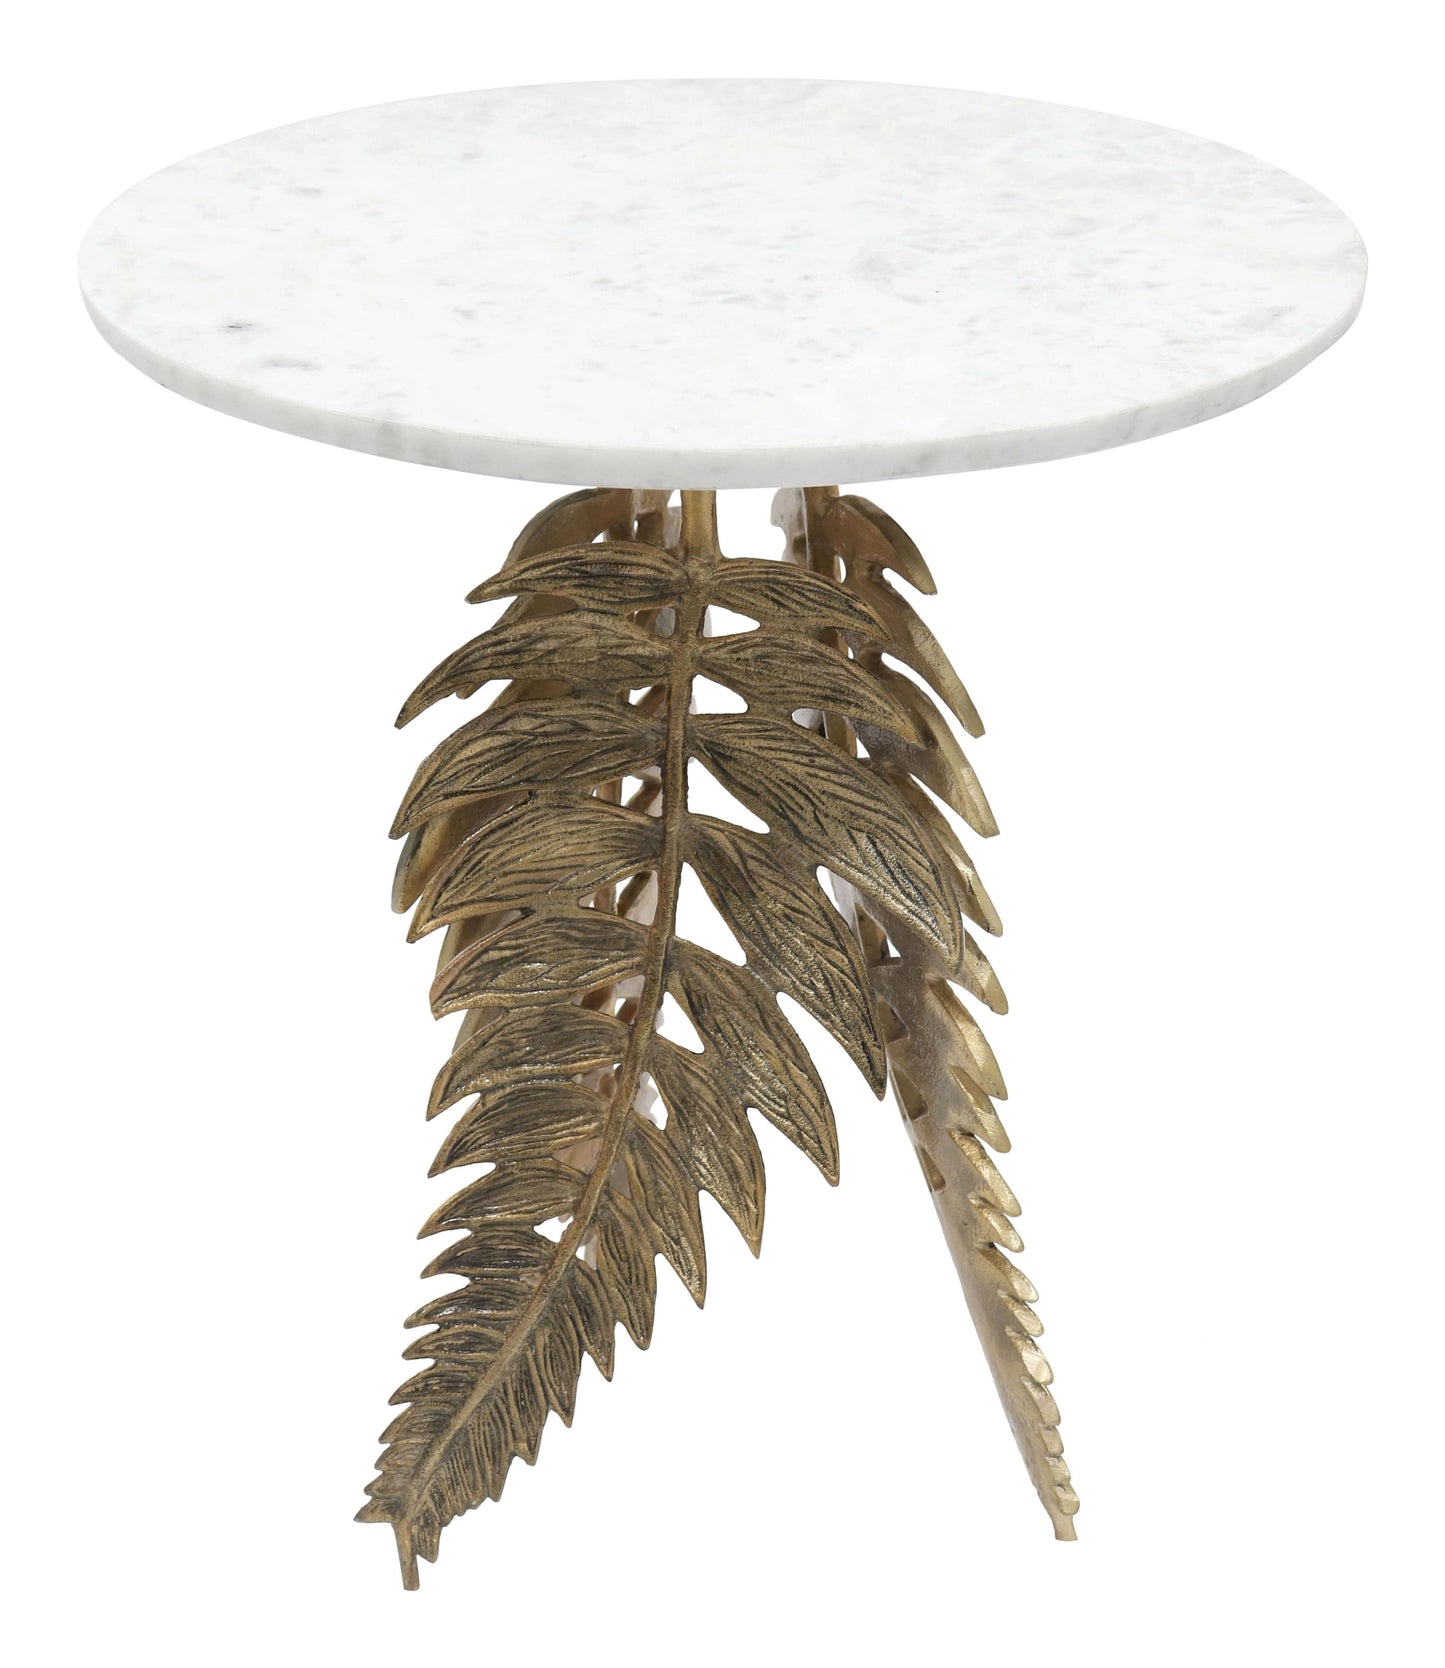 Angled top view of modern glam table